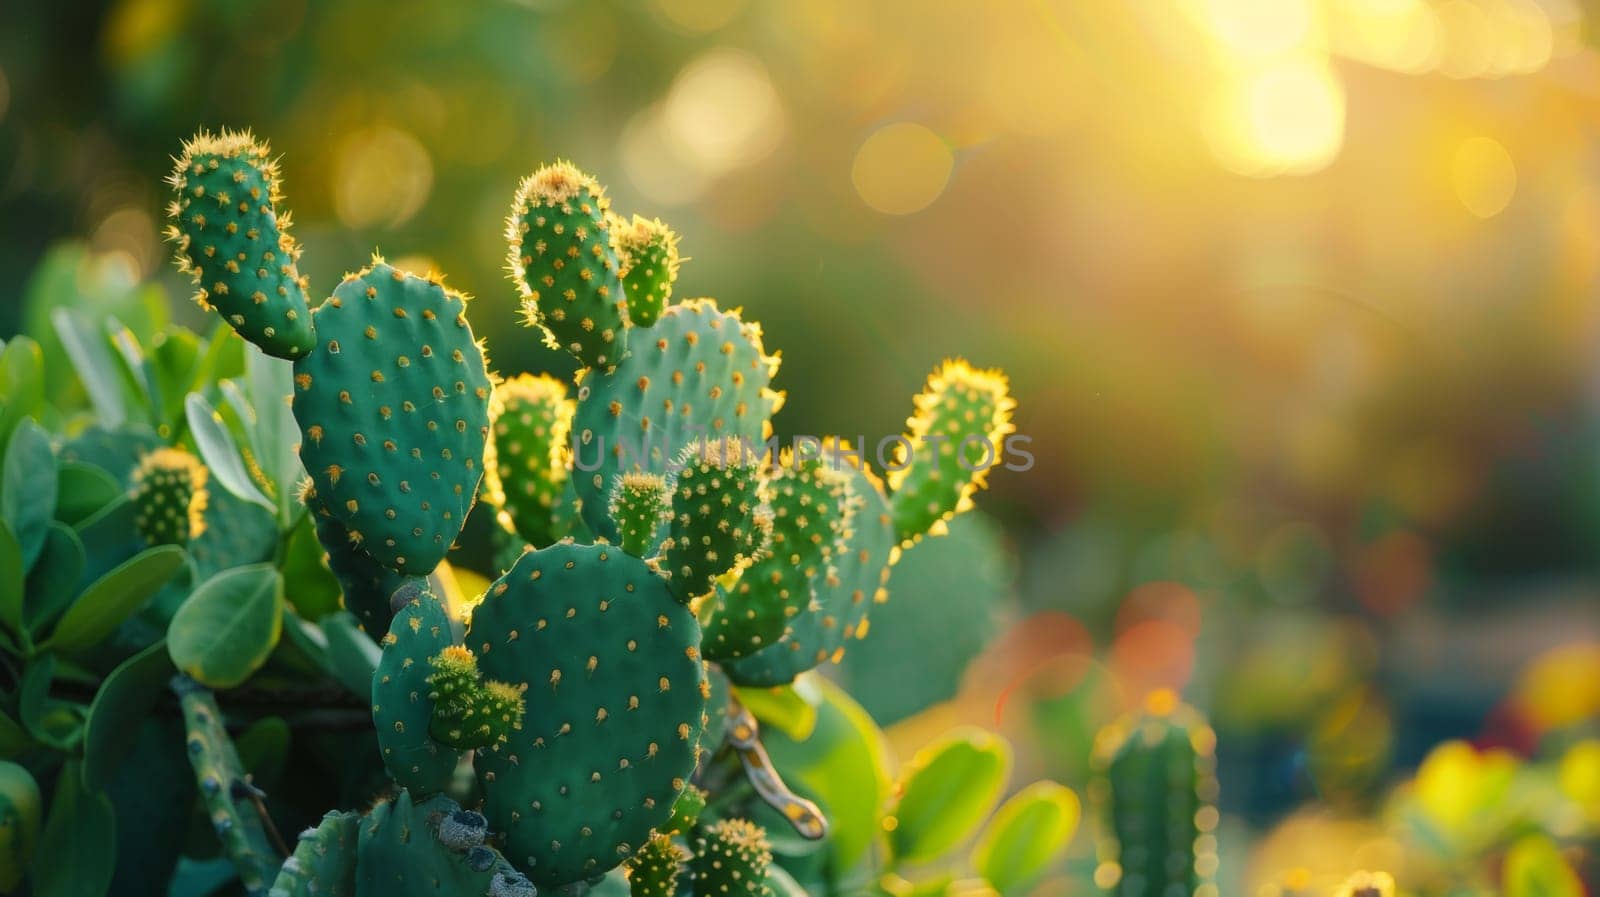 A close up of a cactus plant with many small green leaves